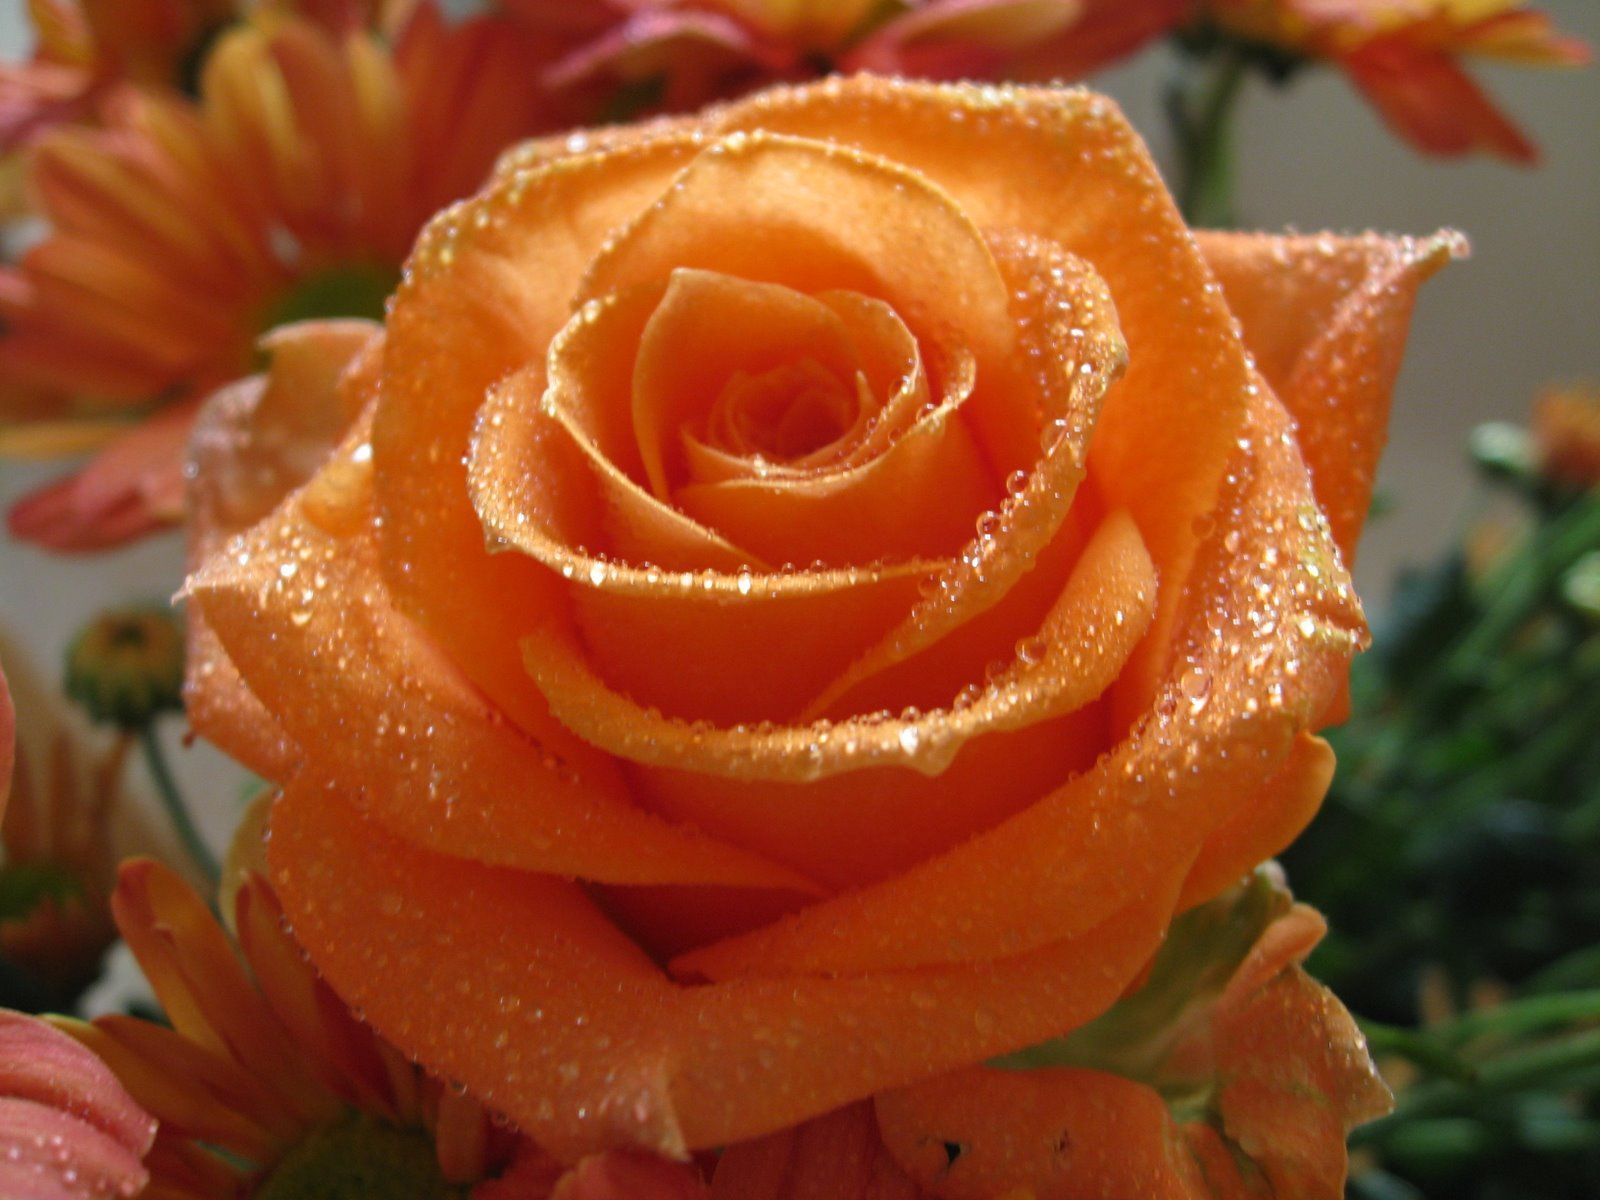 1600x1200 Orange Rose Picture For Wallpaper Flowers For Flower Lovers Orange Rose Wallpaper Rose Flower Wallpaper Rose Flower Picture Orange Roses